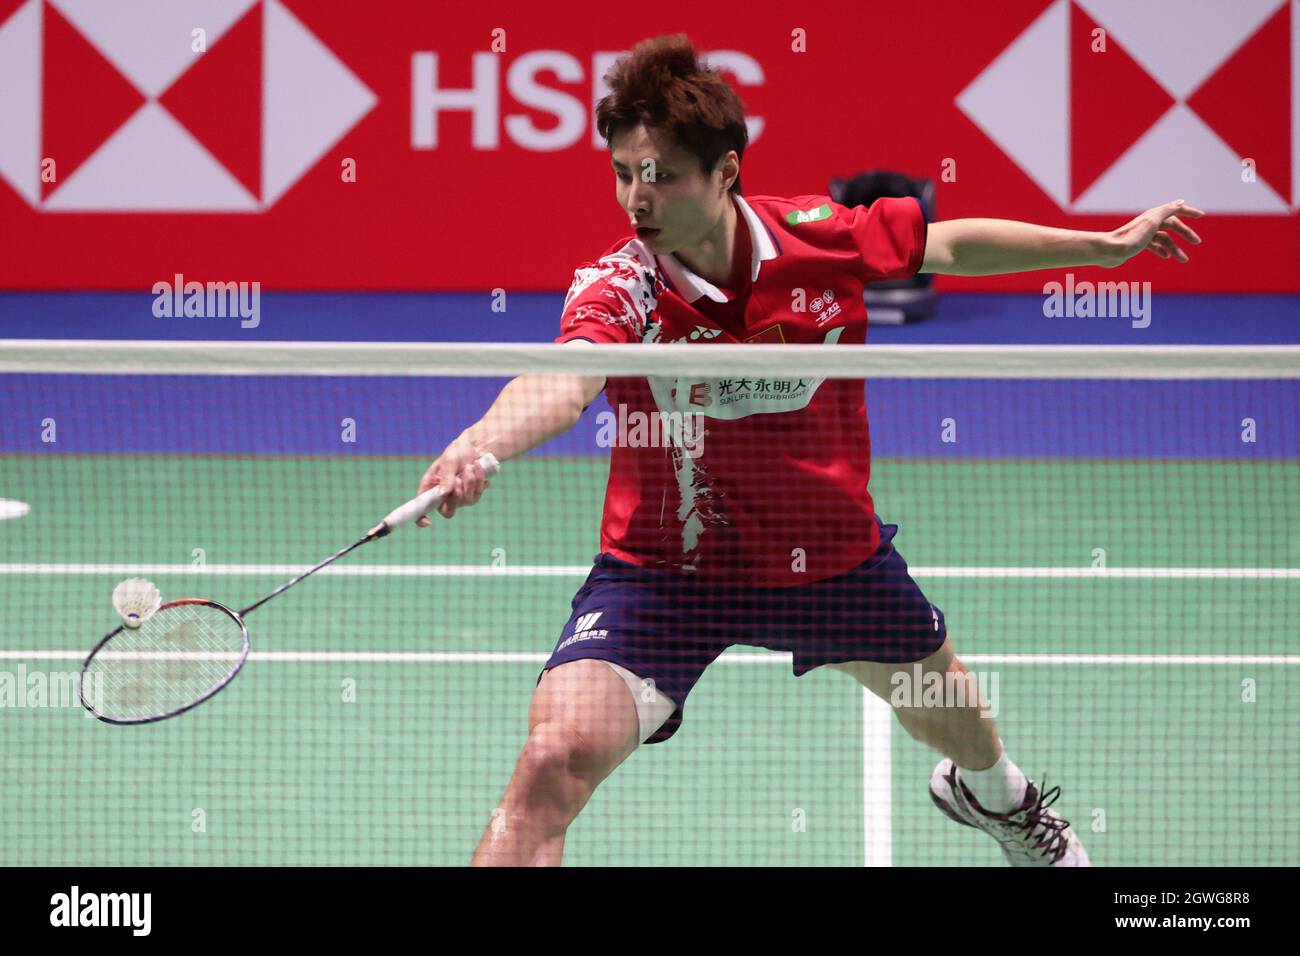 Vantaa, Finland. 3rd Oct, 2021. Shi Yuqi of China competes during the men's  singles match against Momota Kento of Japan of the final between China and  Japan at Badminton Sudirman Cup 2021